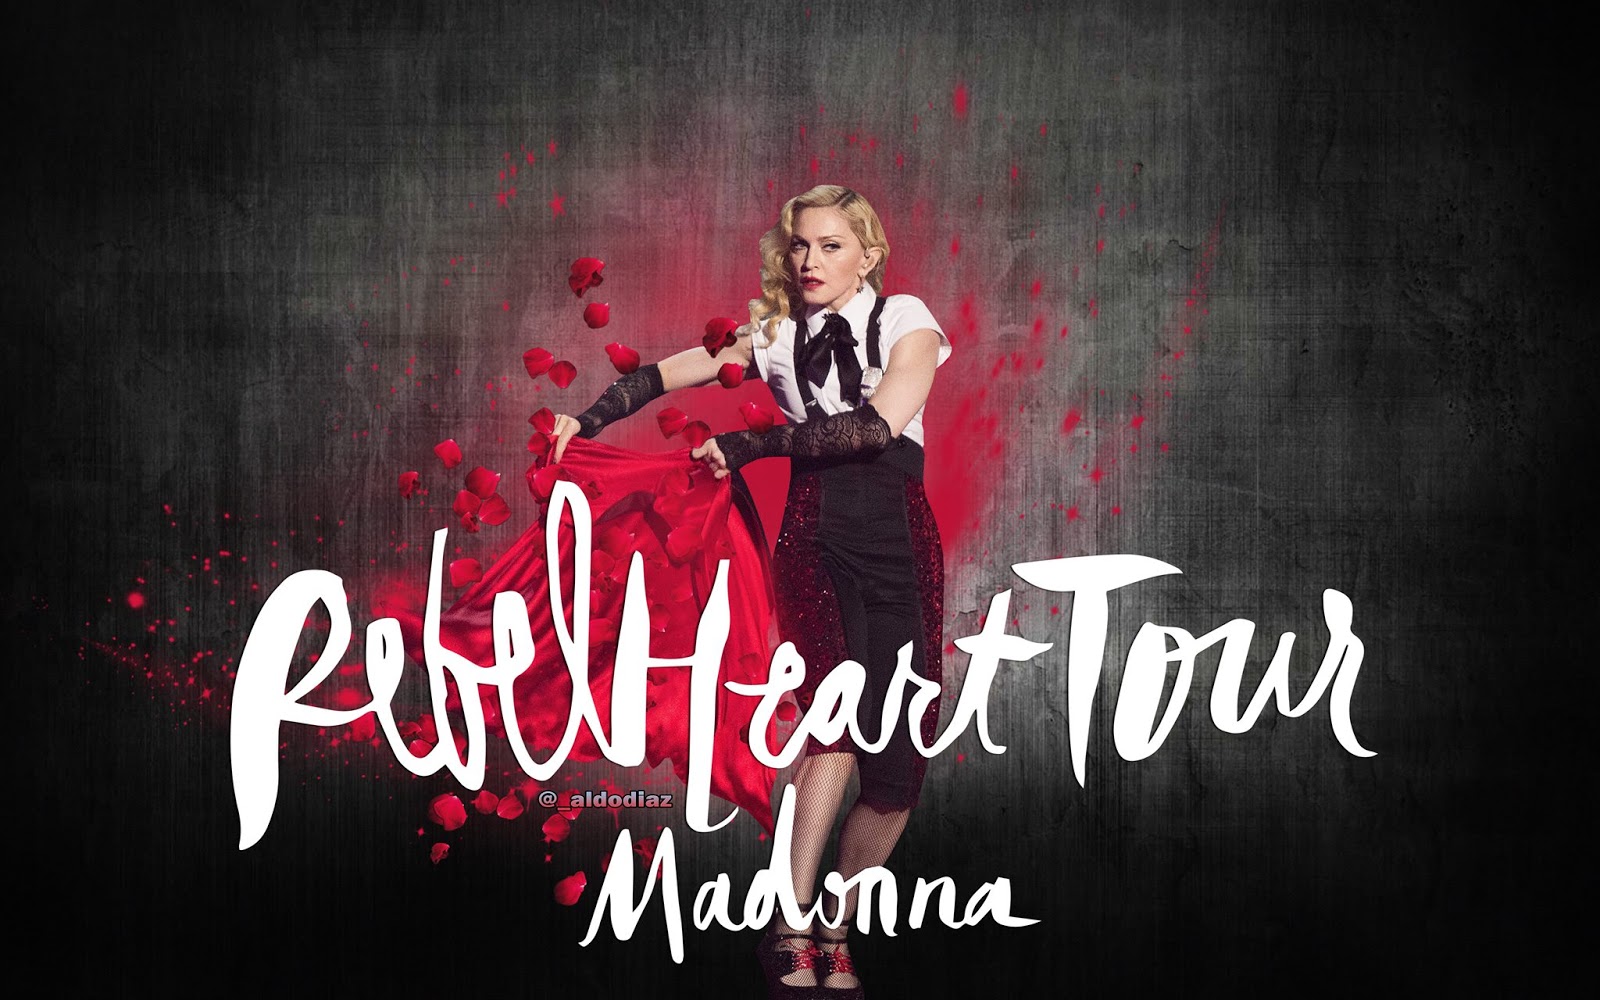 Madonna Fanmade Covers Rebel Heart Tour